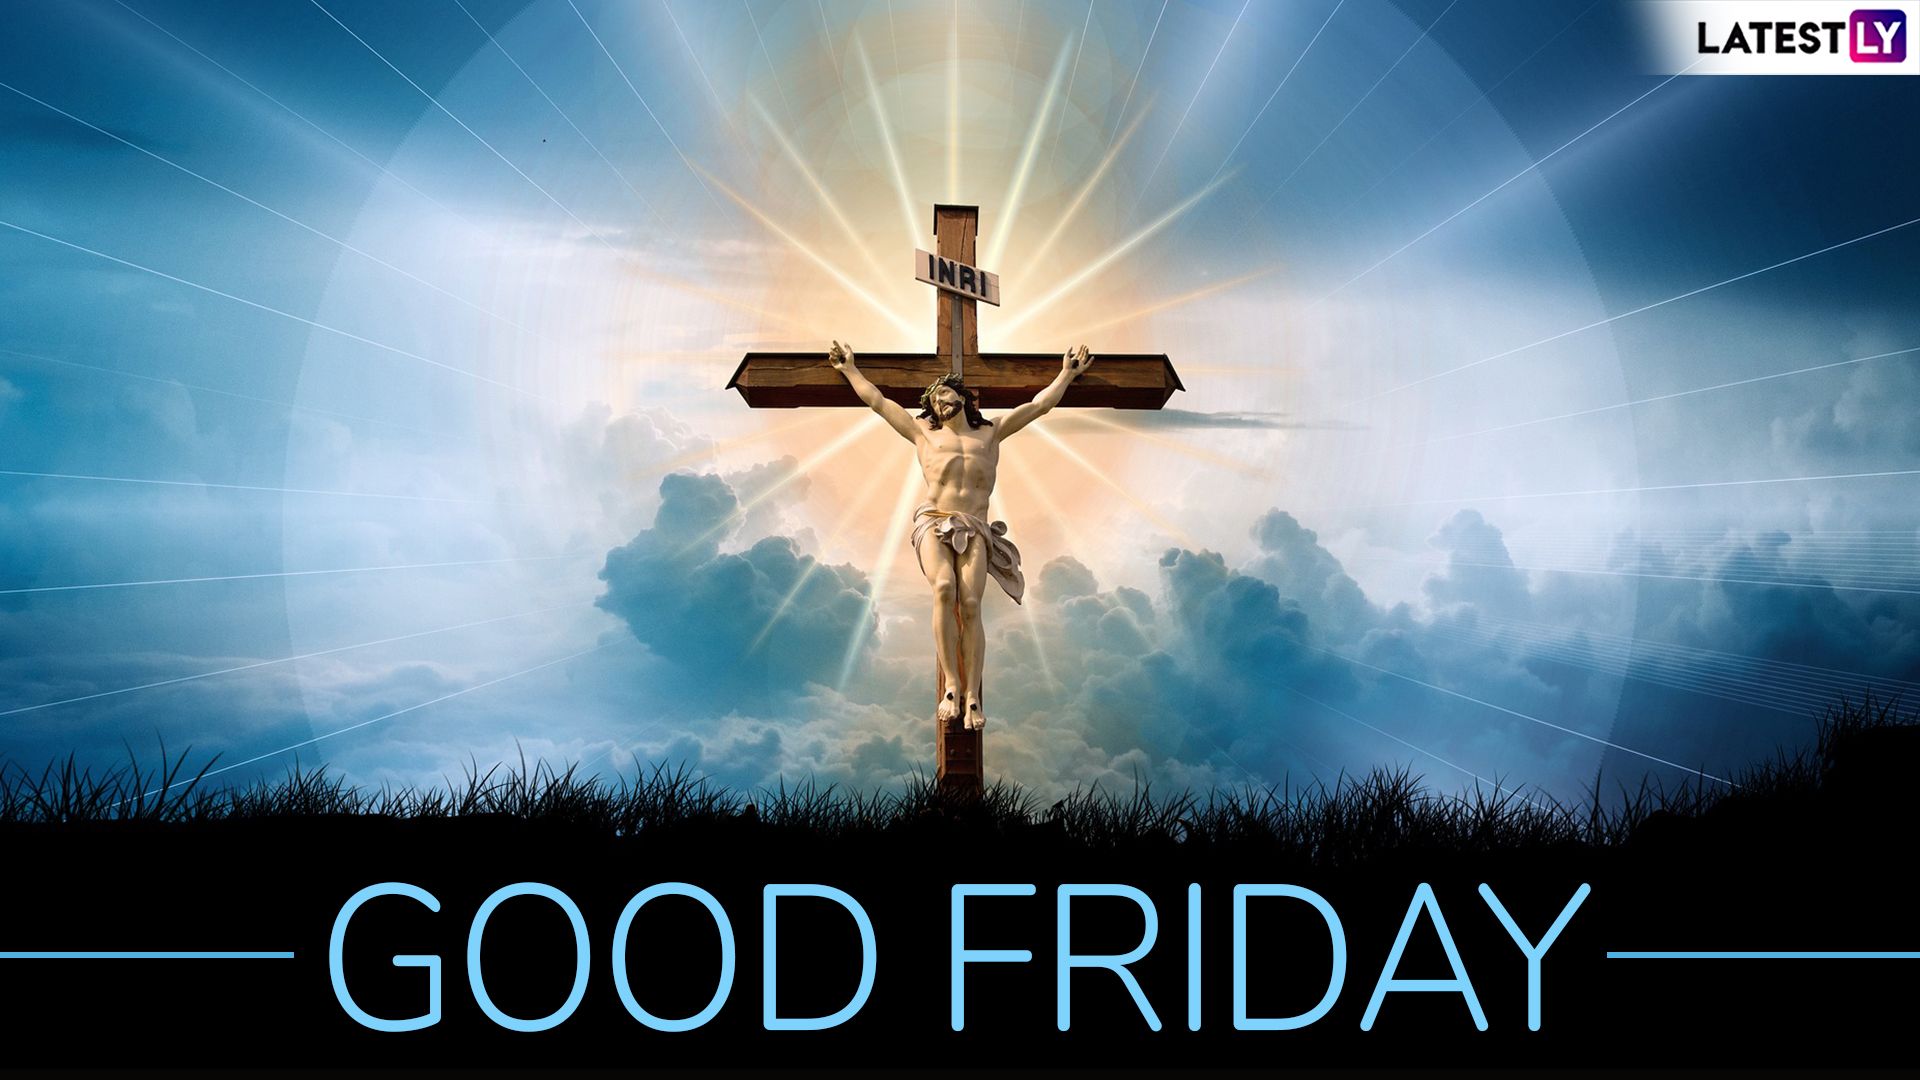 Good Friday Image for Free Download Online: Send Good Friday 2019 Messages and Quotes in Remembrance of Jesus Christ